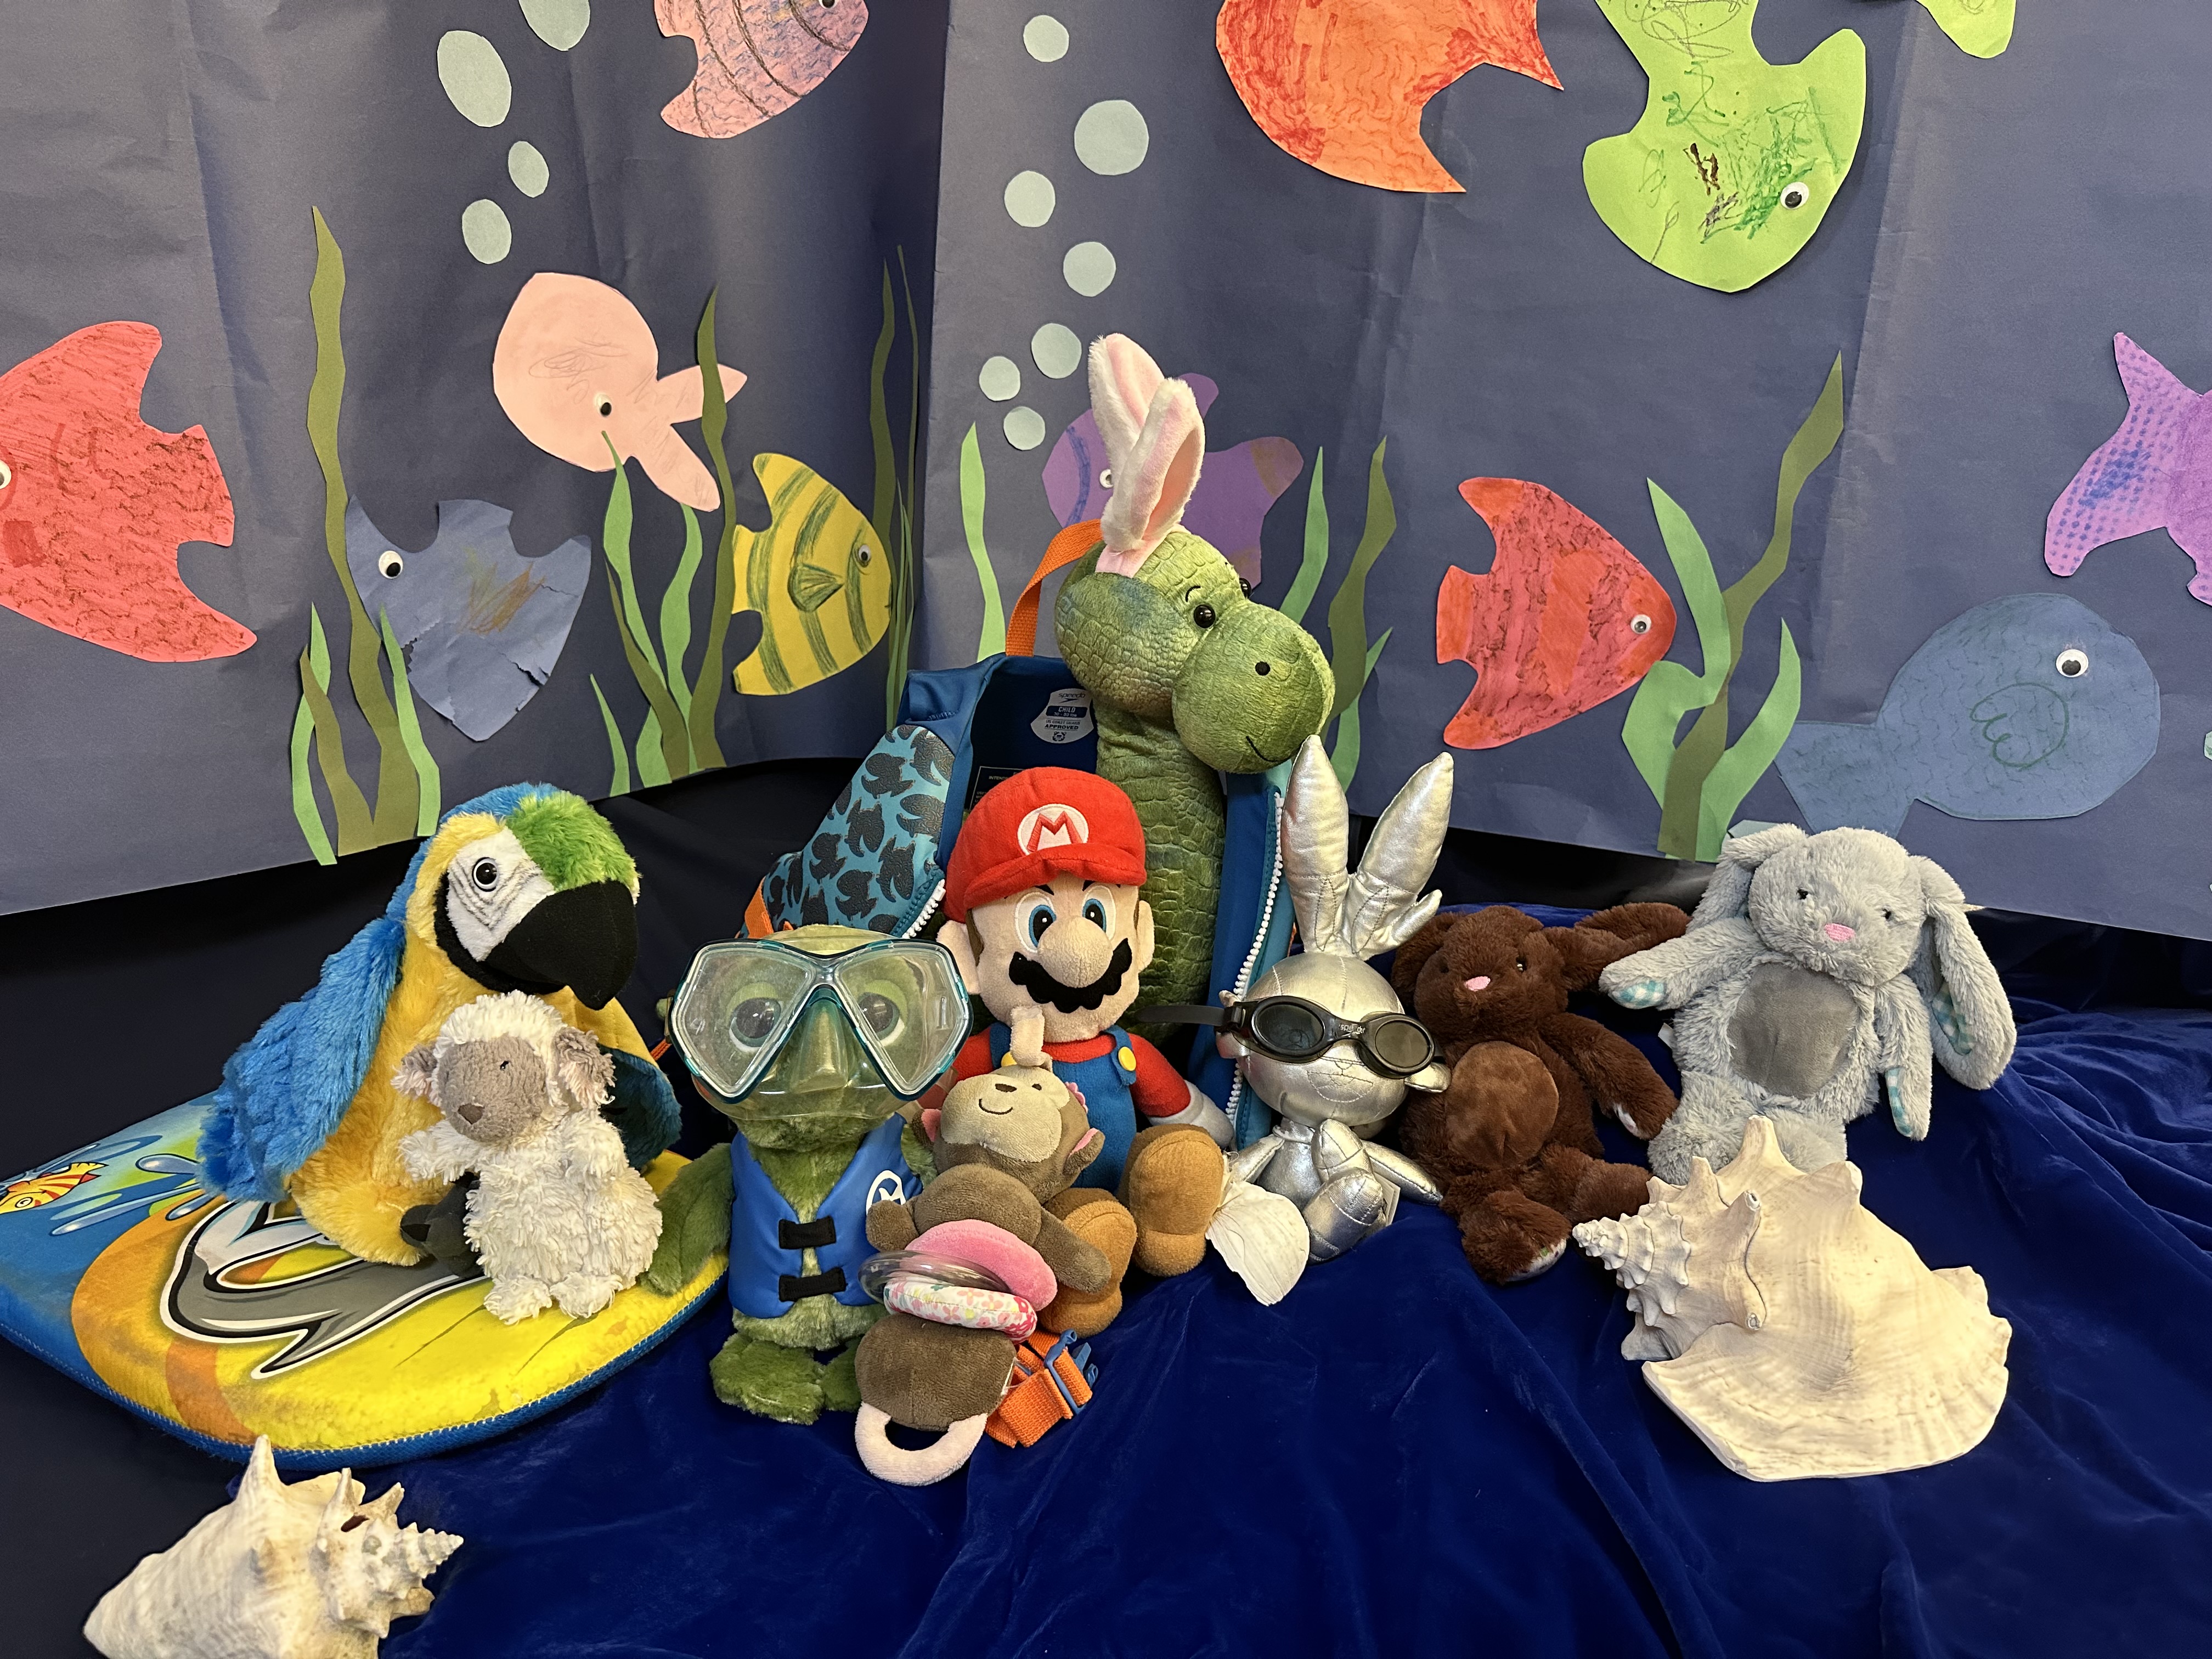 Stuffed animals with backdrop of fish mural made by participants